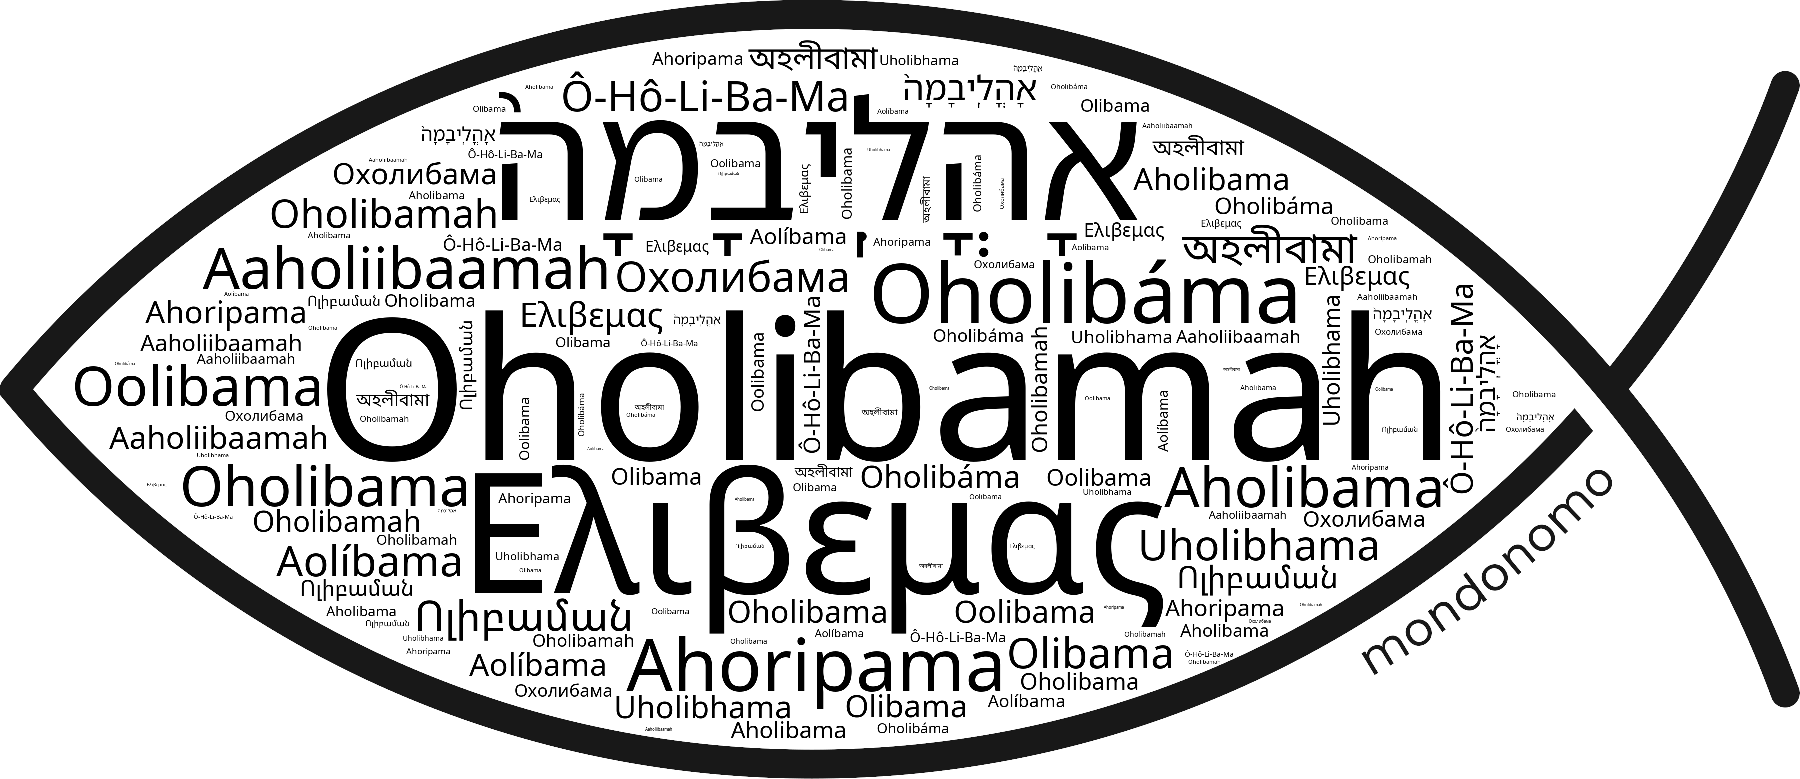 Name Oholibamah in the world's Bibles